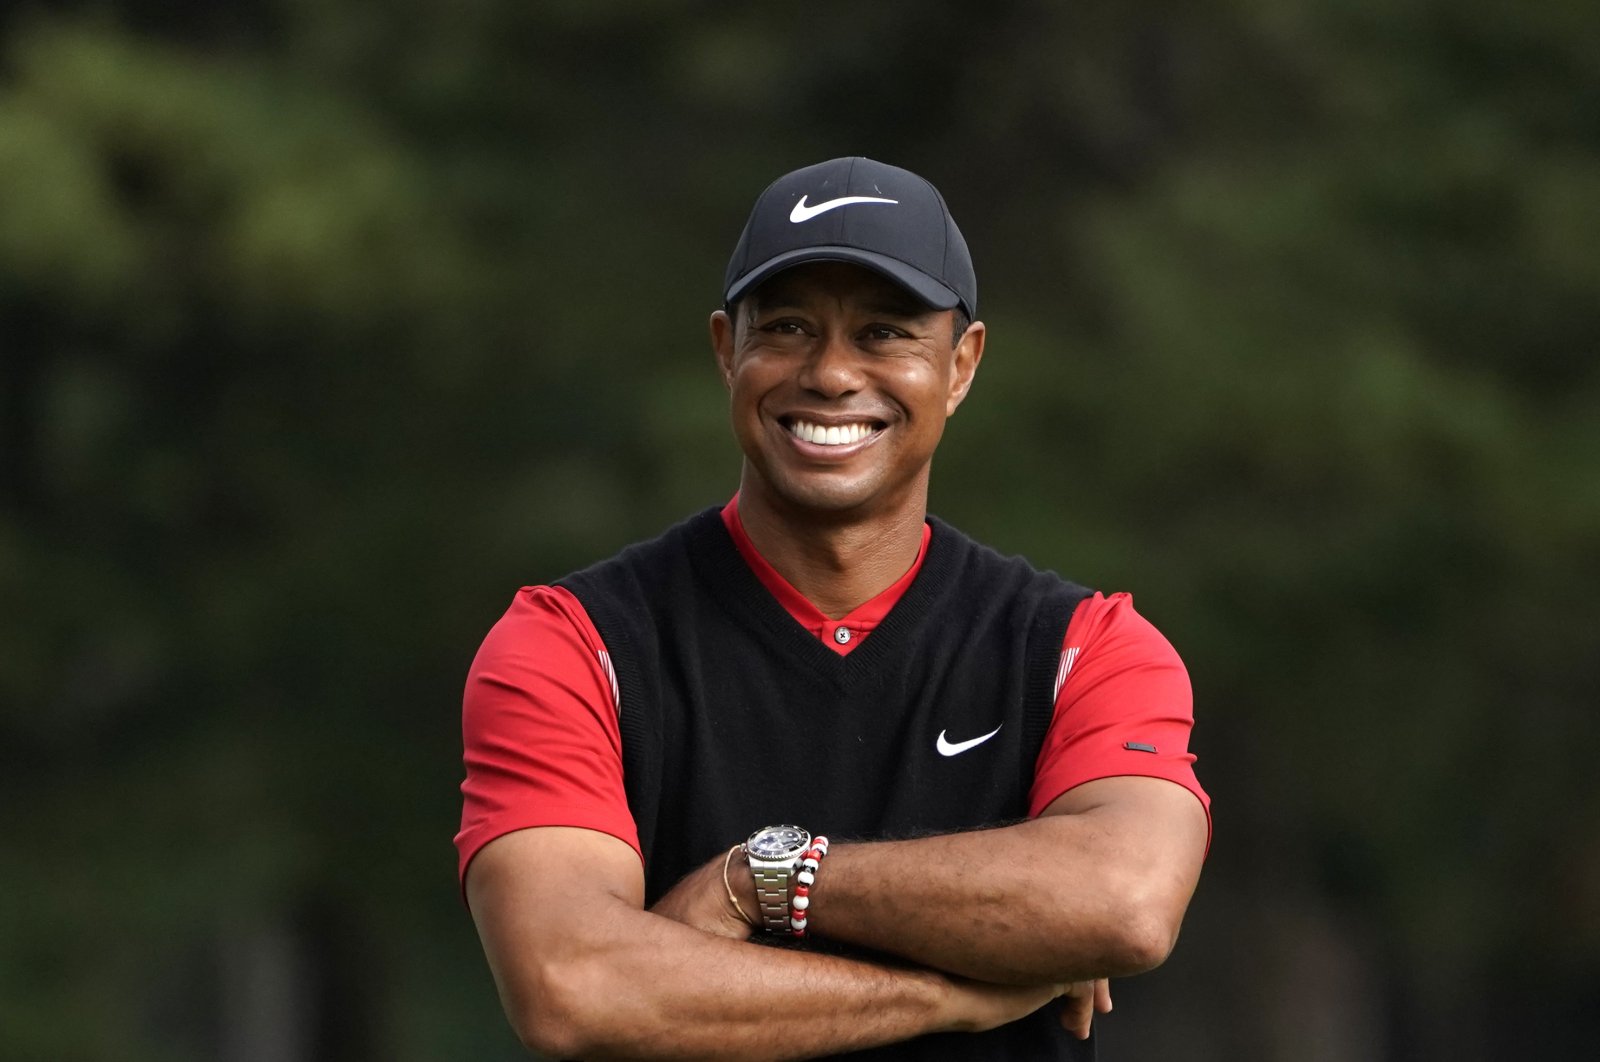 Tiger Woods smiles during after winning the Zozo Championship PGA Tour at the Accordia Golf Narashino country club in Inzai, Tokyo, Japan, Oct. 28, 2019. (AP Photo)